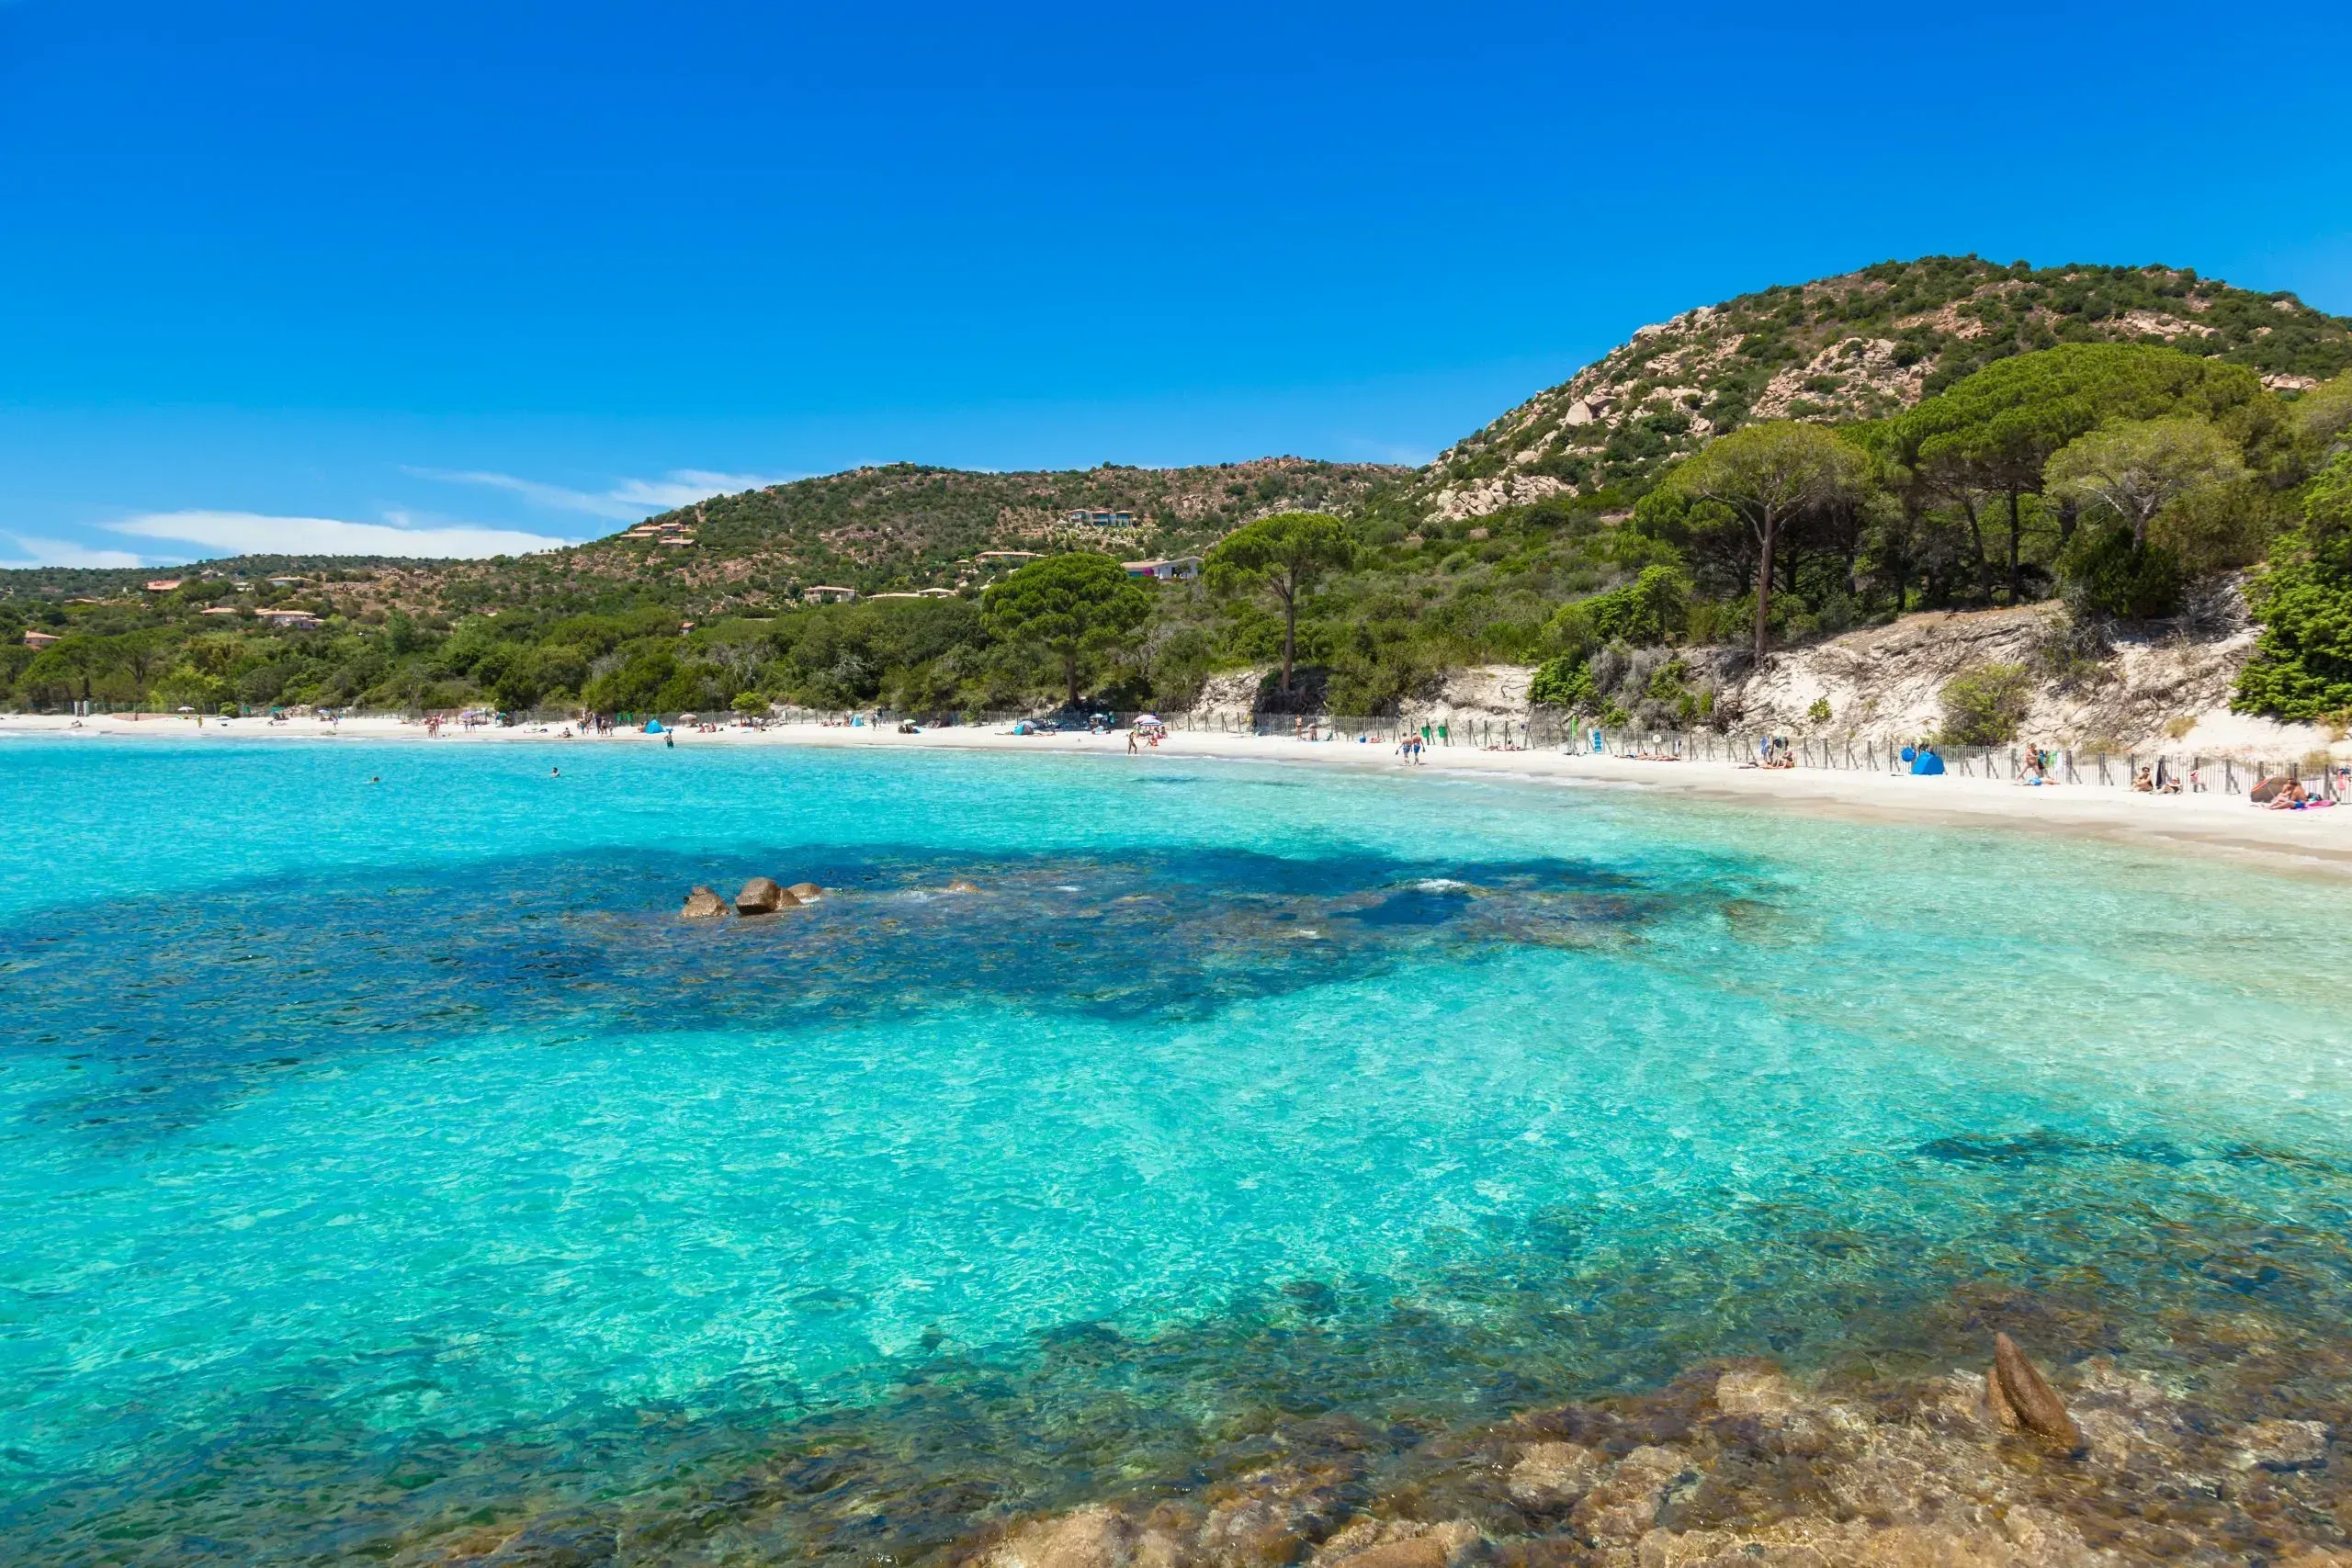 Unwind at Figari's Secluded Beach